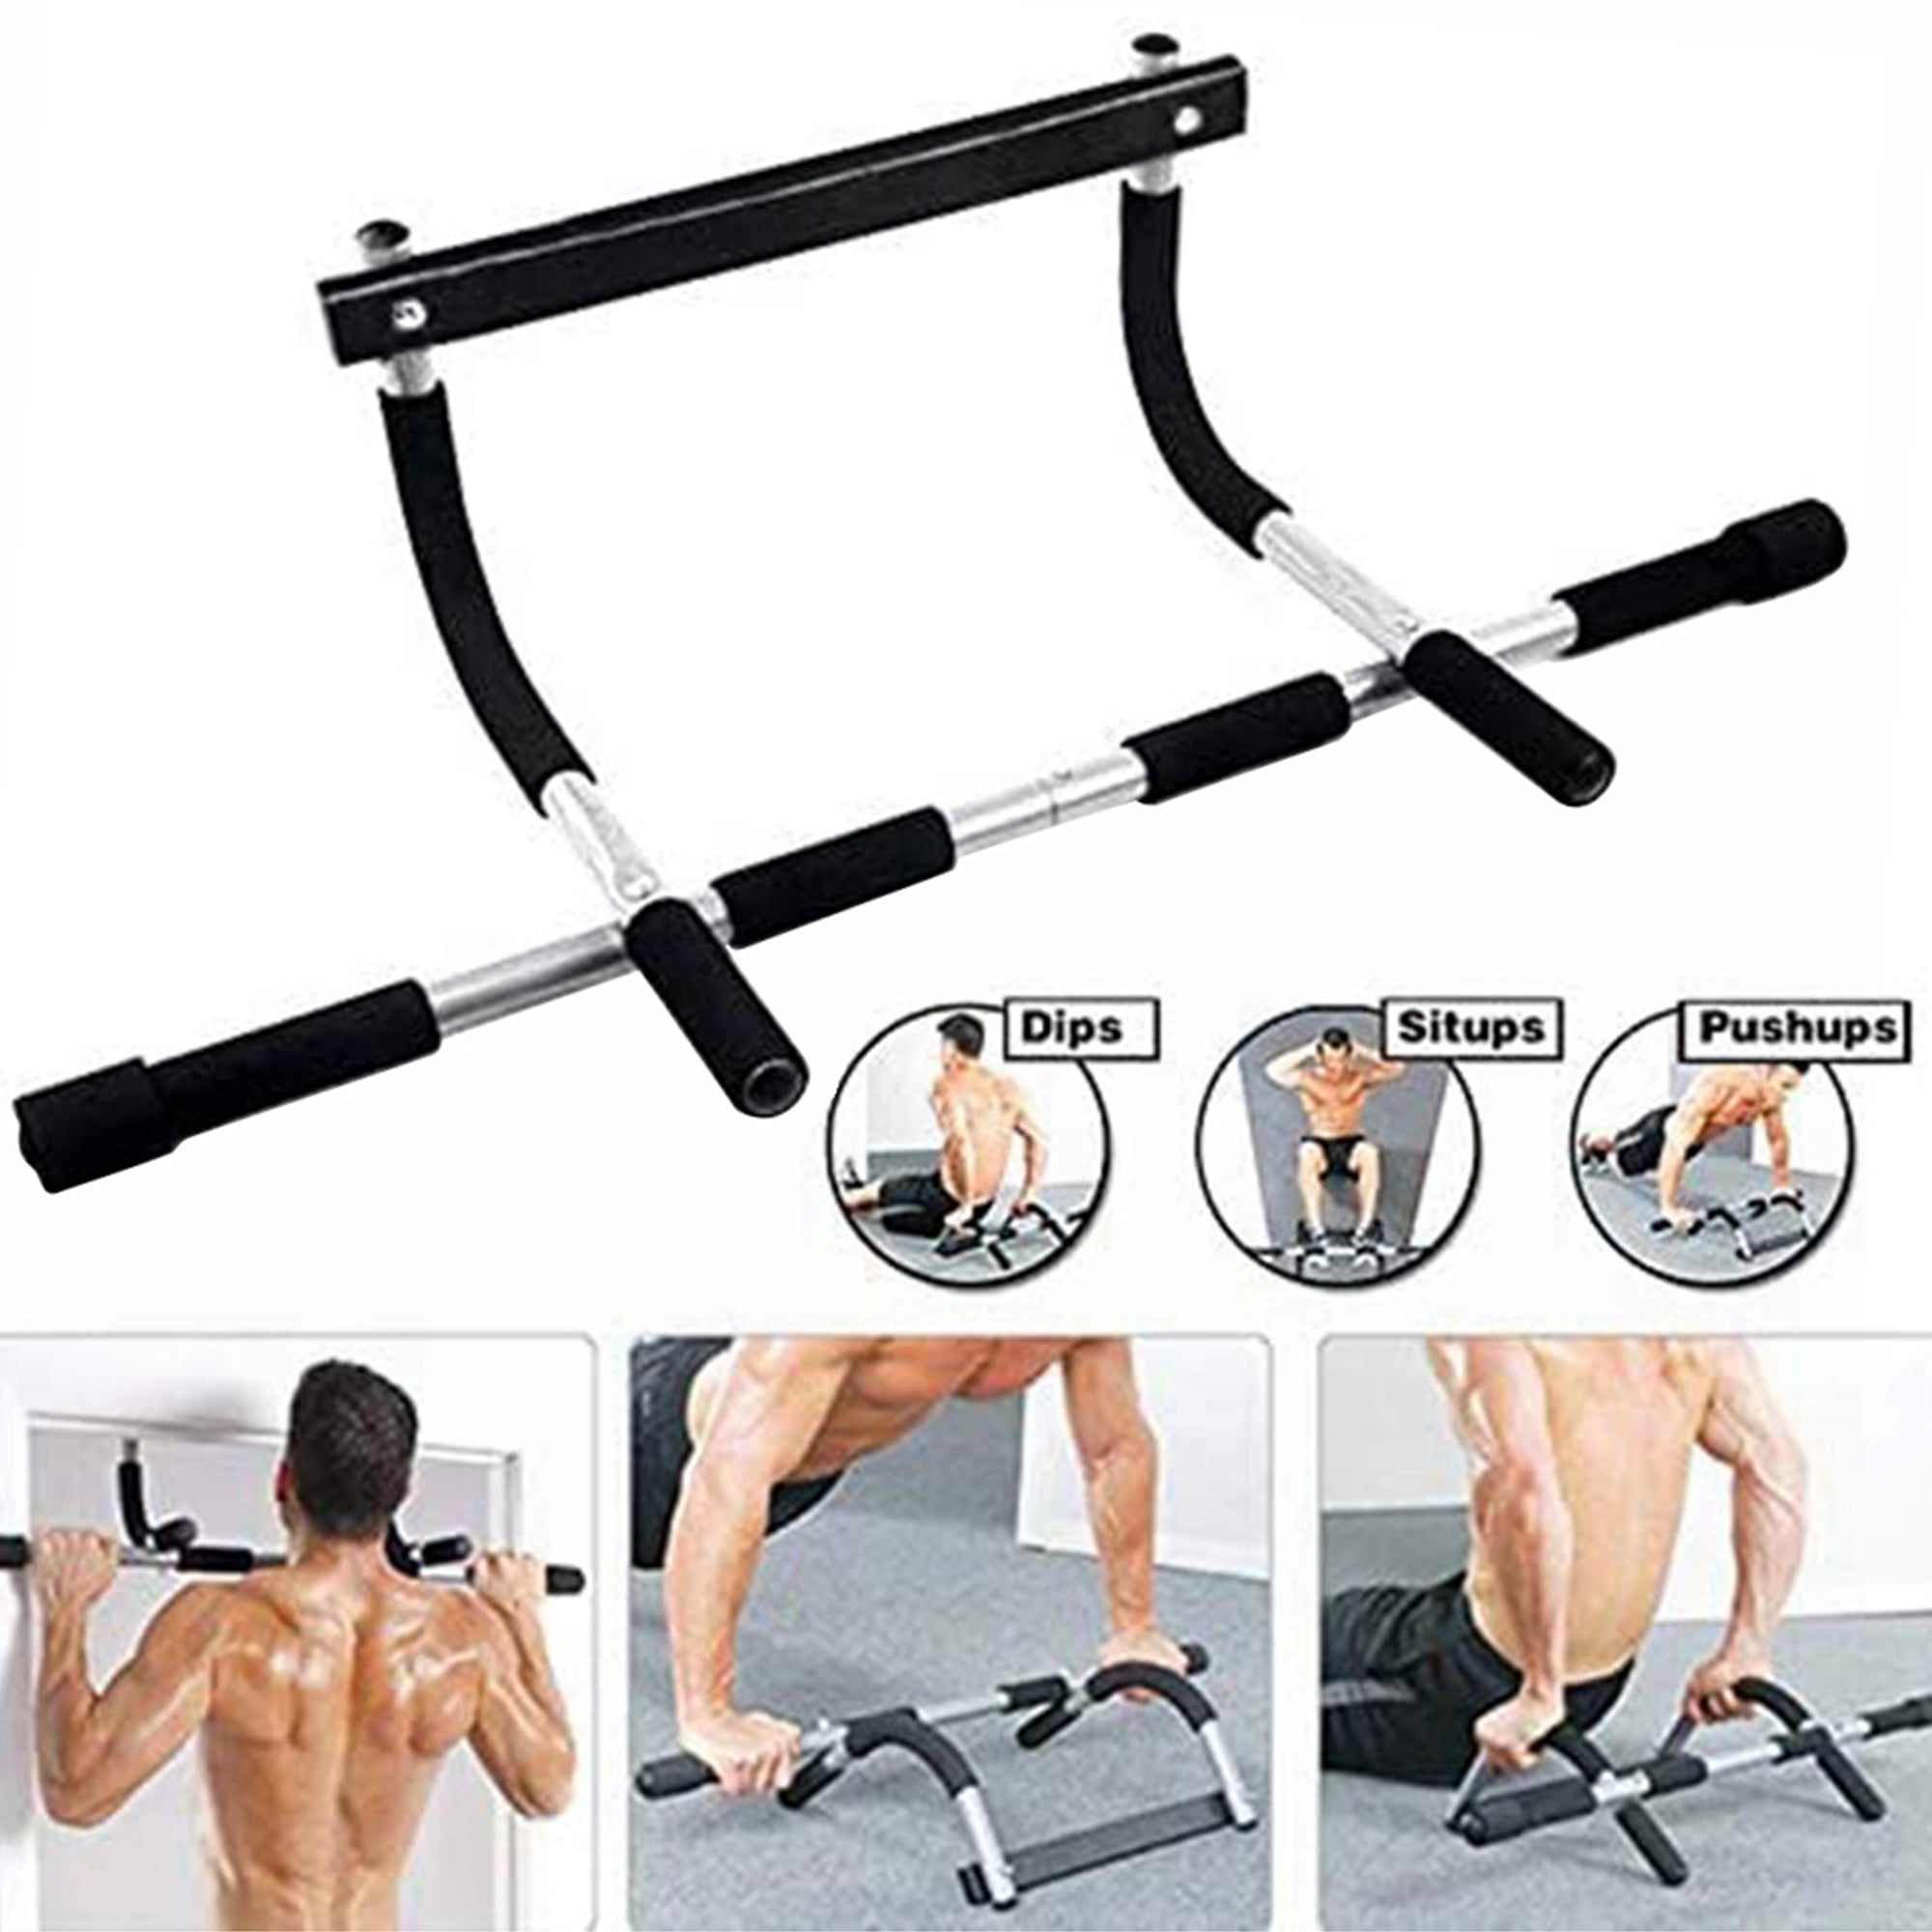 GYM FITNESS BAR CHIN UP PULL UP STRENGTH SITUP DIPS EXERCISE WORKOUT DOOR BARS 